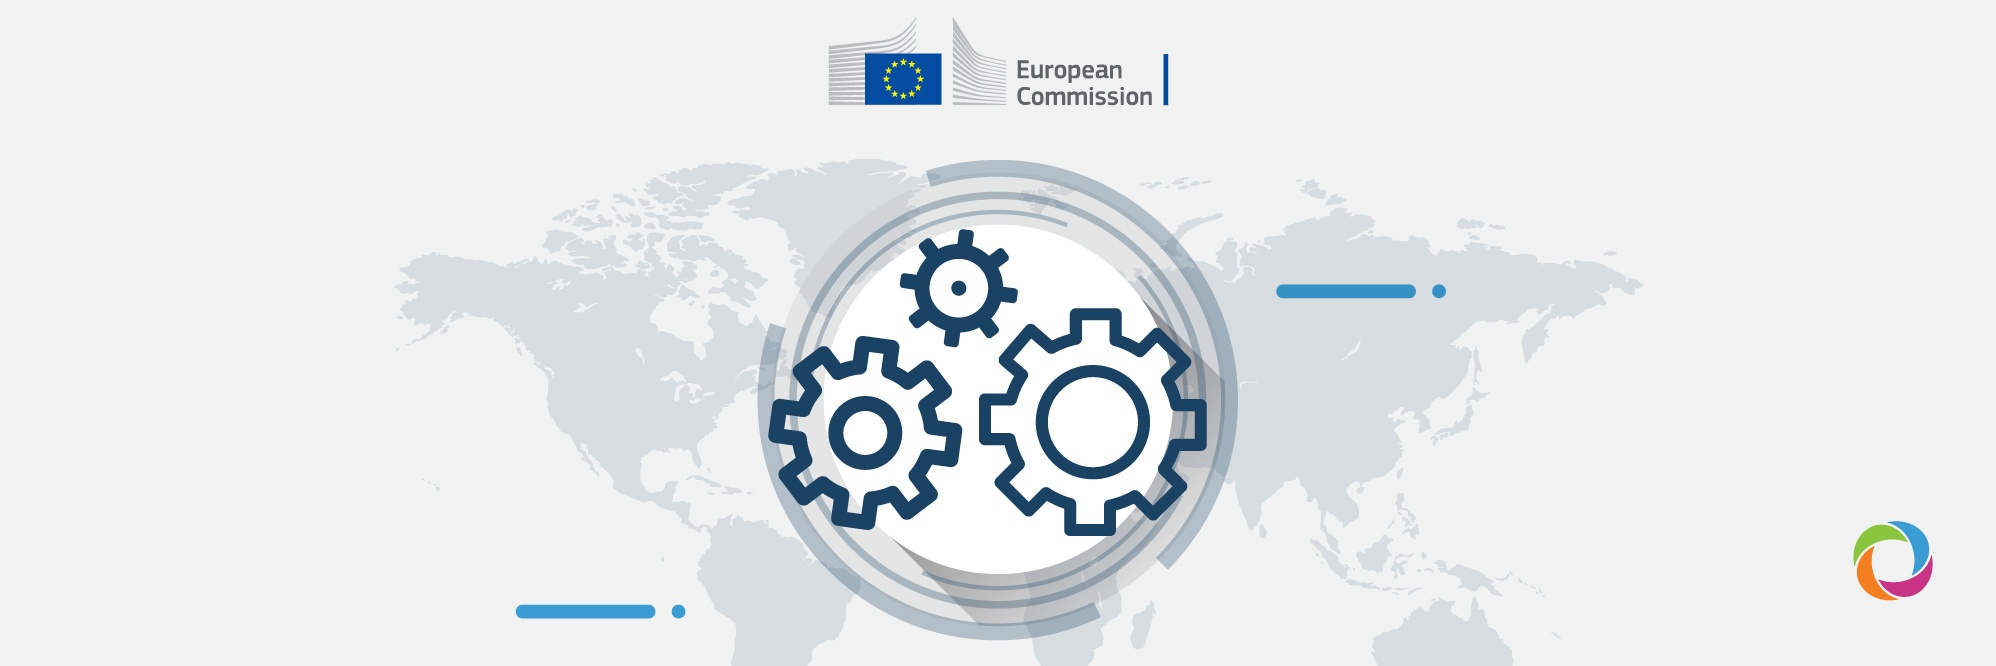 “Global Europe” at a glance: what to expect from the EU’s newest development instrument